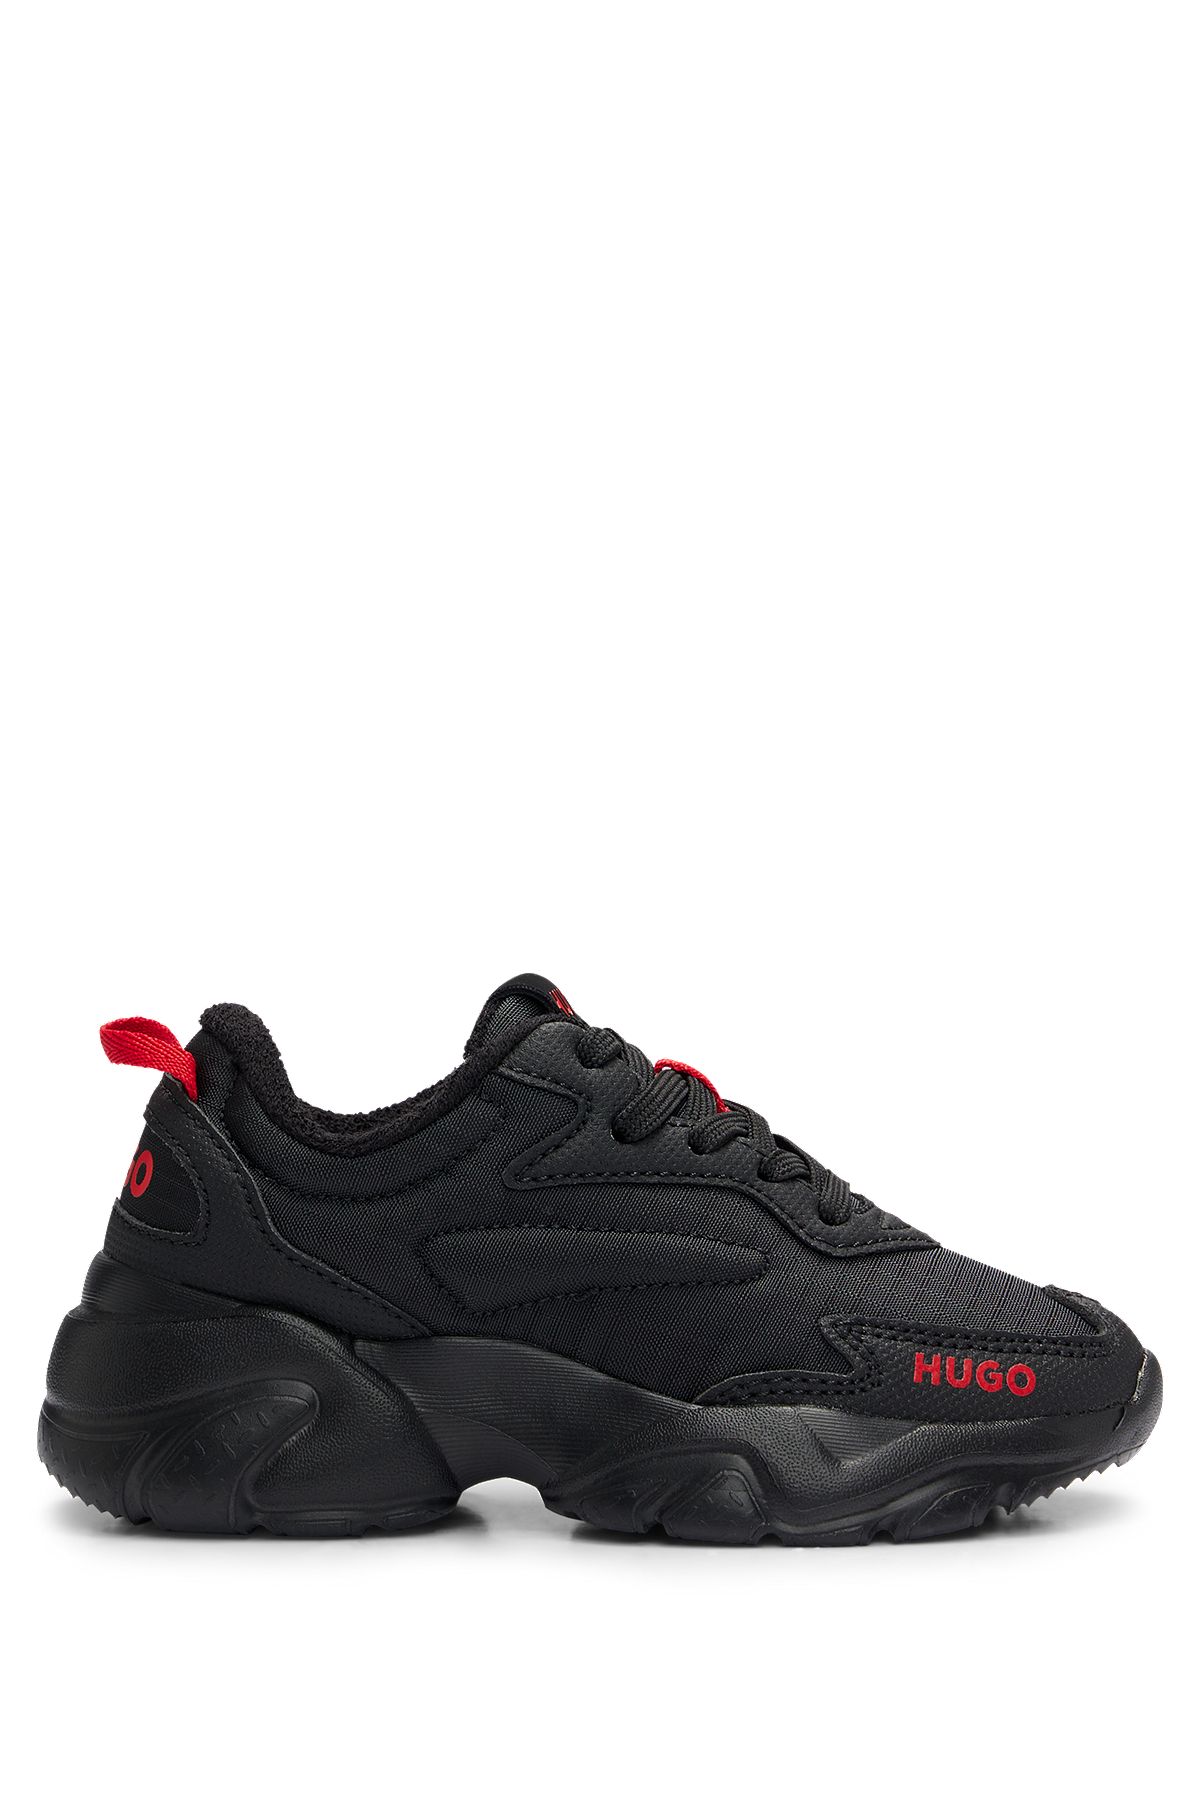 Kids' logo trainers in faux leather and ripstop fabric, Black